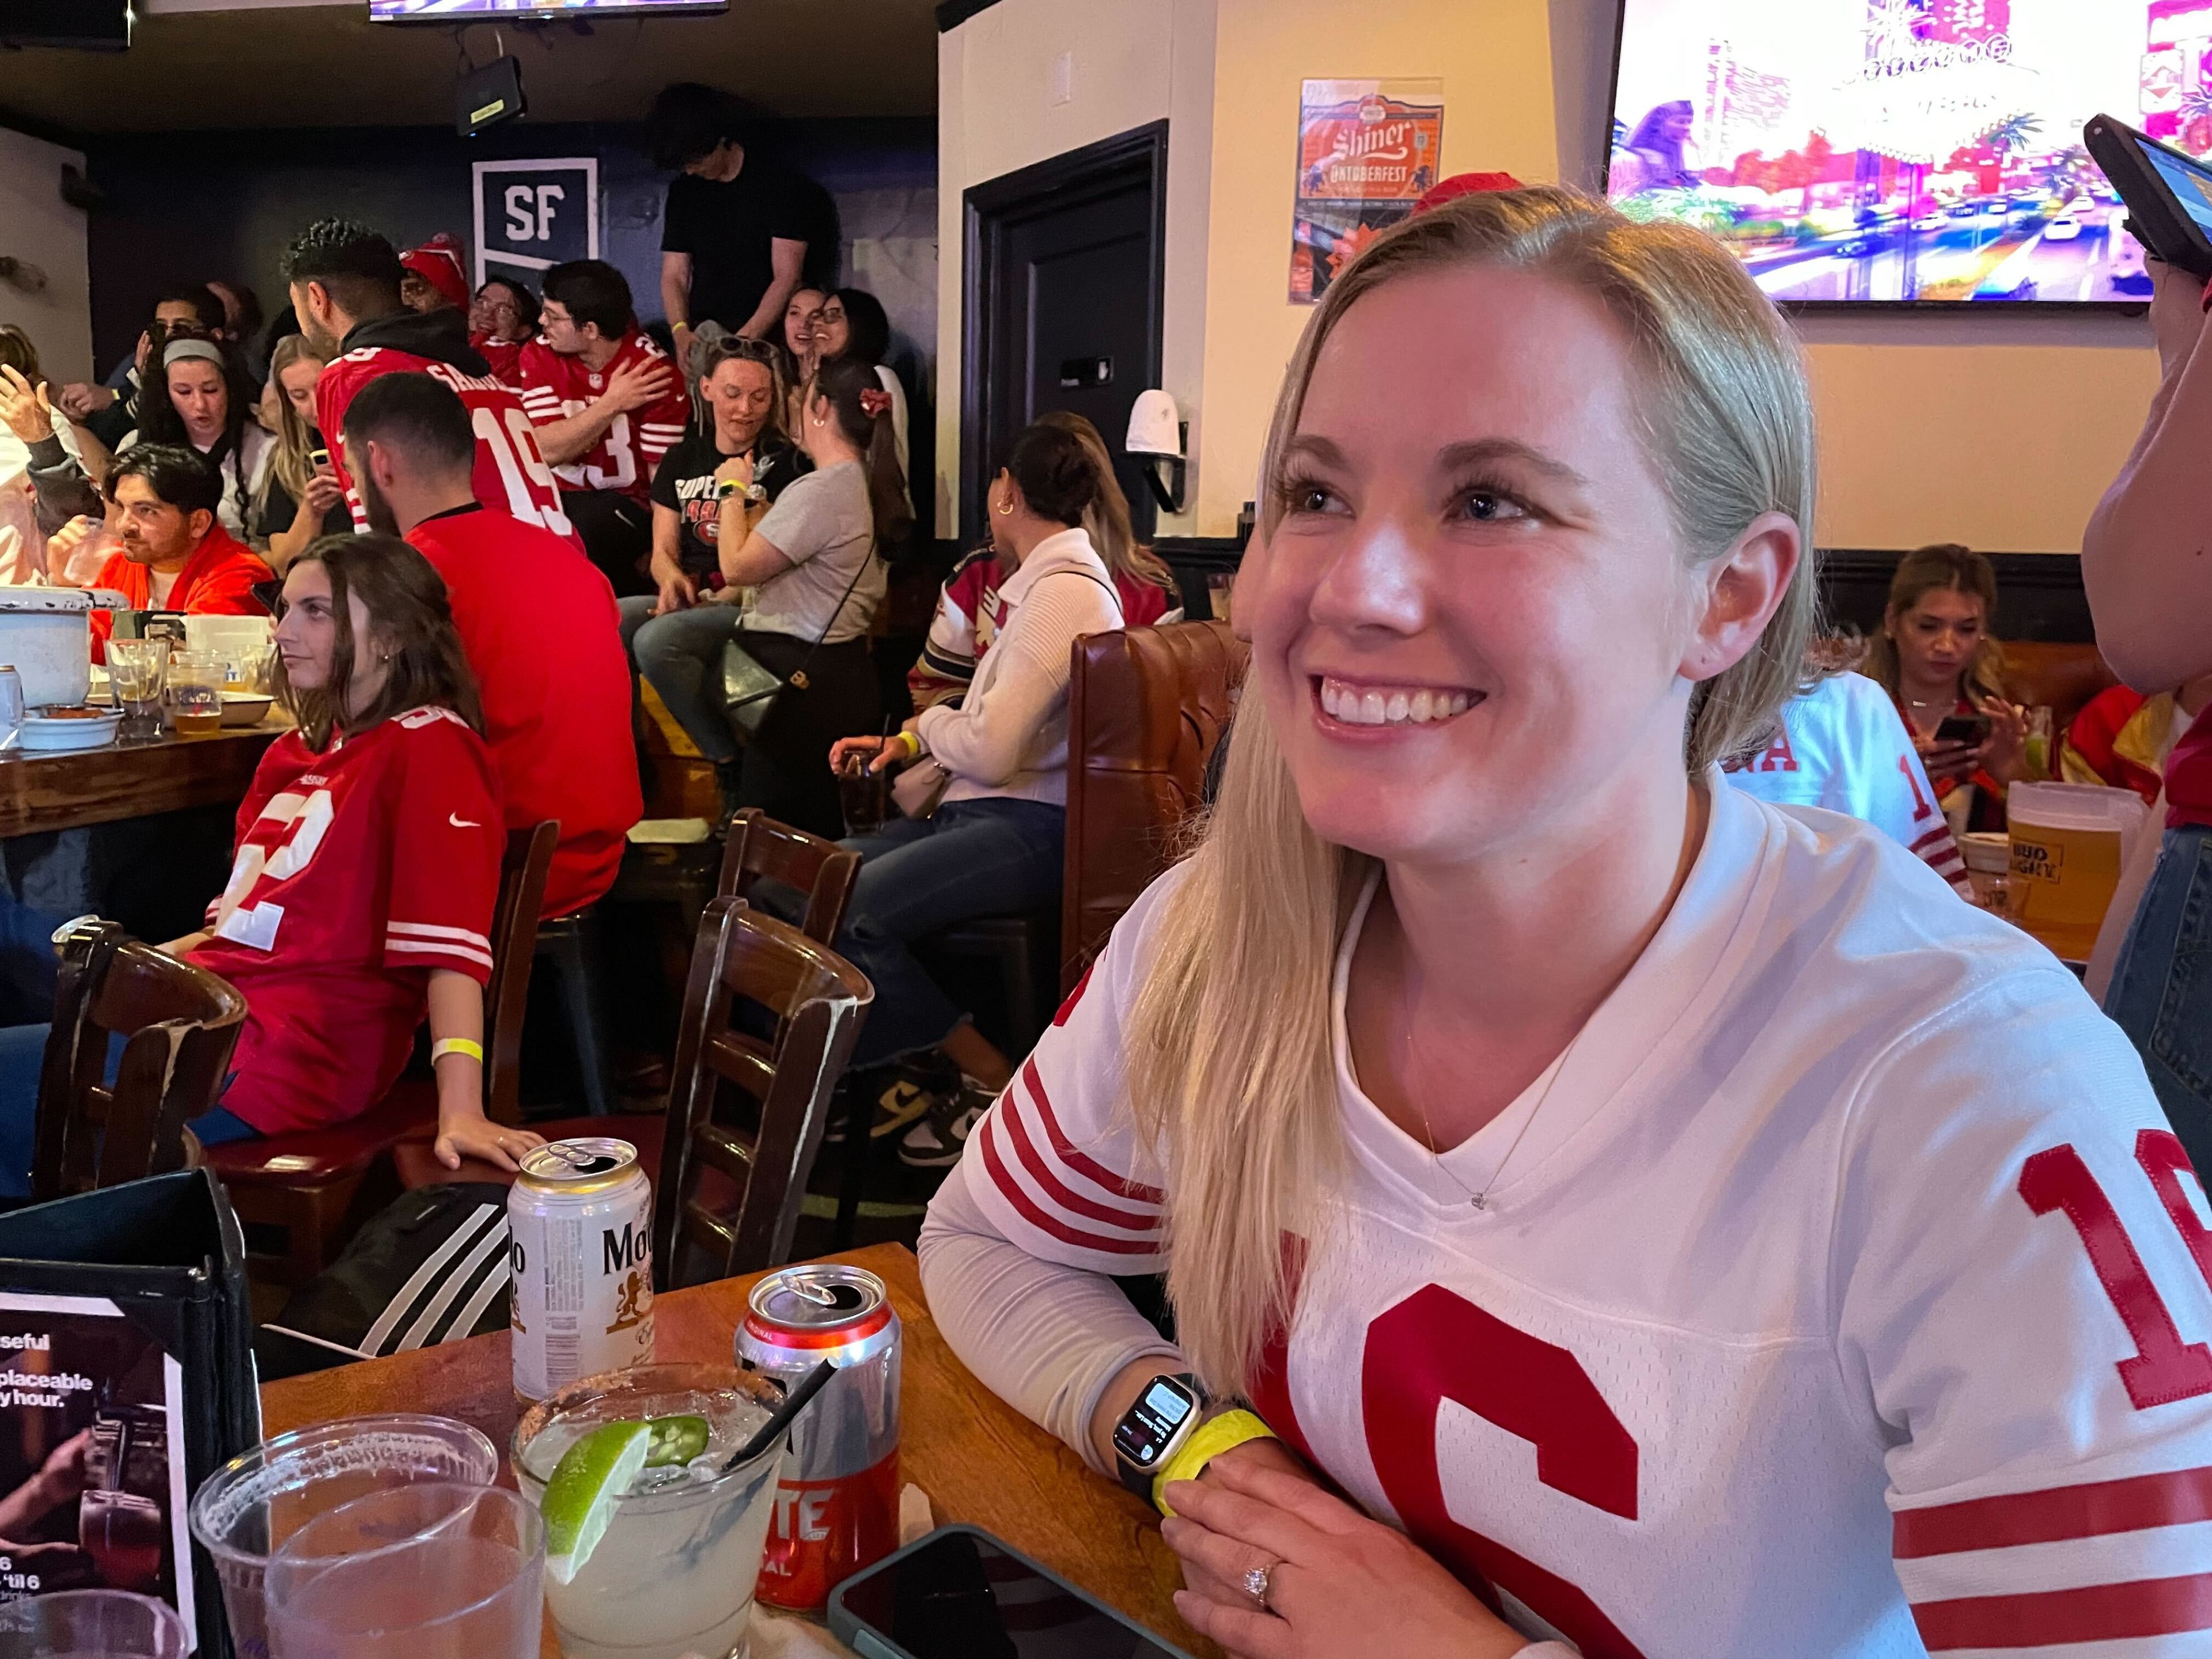 A smiling woman in a number 10 sports jersey sits in a bar filled with people wearing red and white.